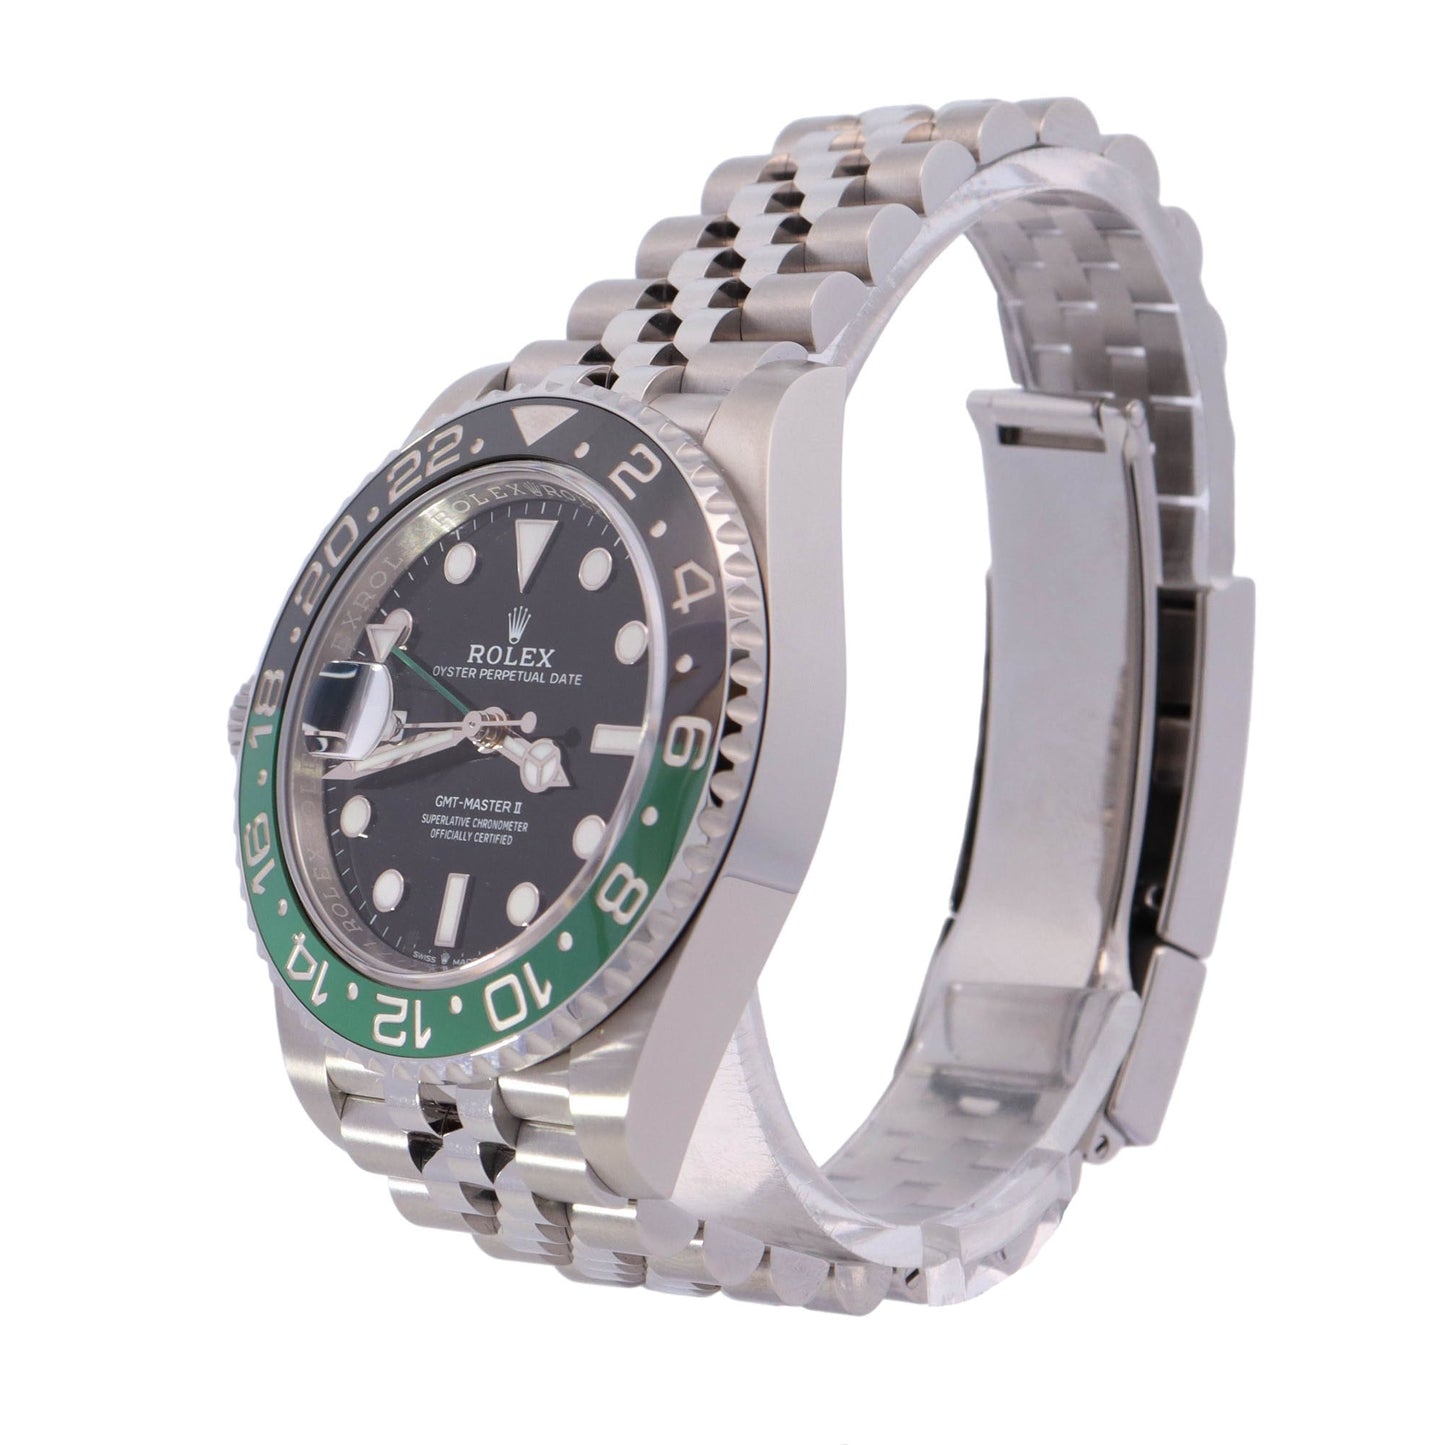 Rolex GMT Master II Stainless Steel 40mm "SPRITE" Black Dot Dial Watch Reference #:126720VTNR